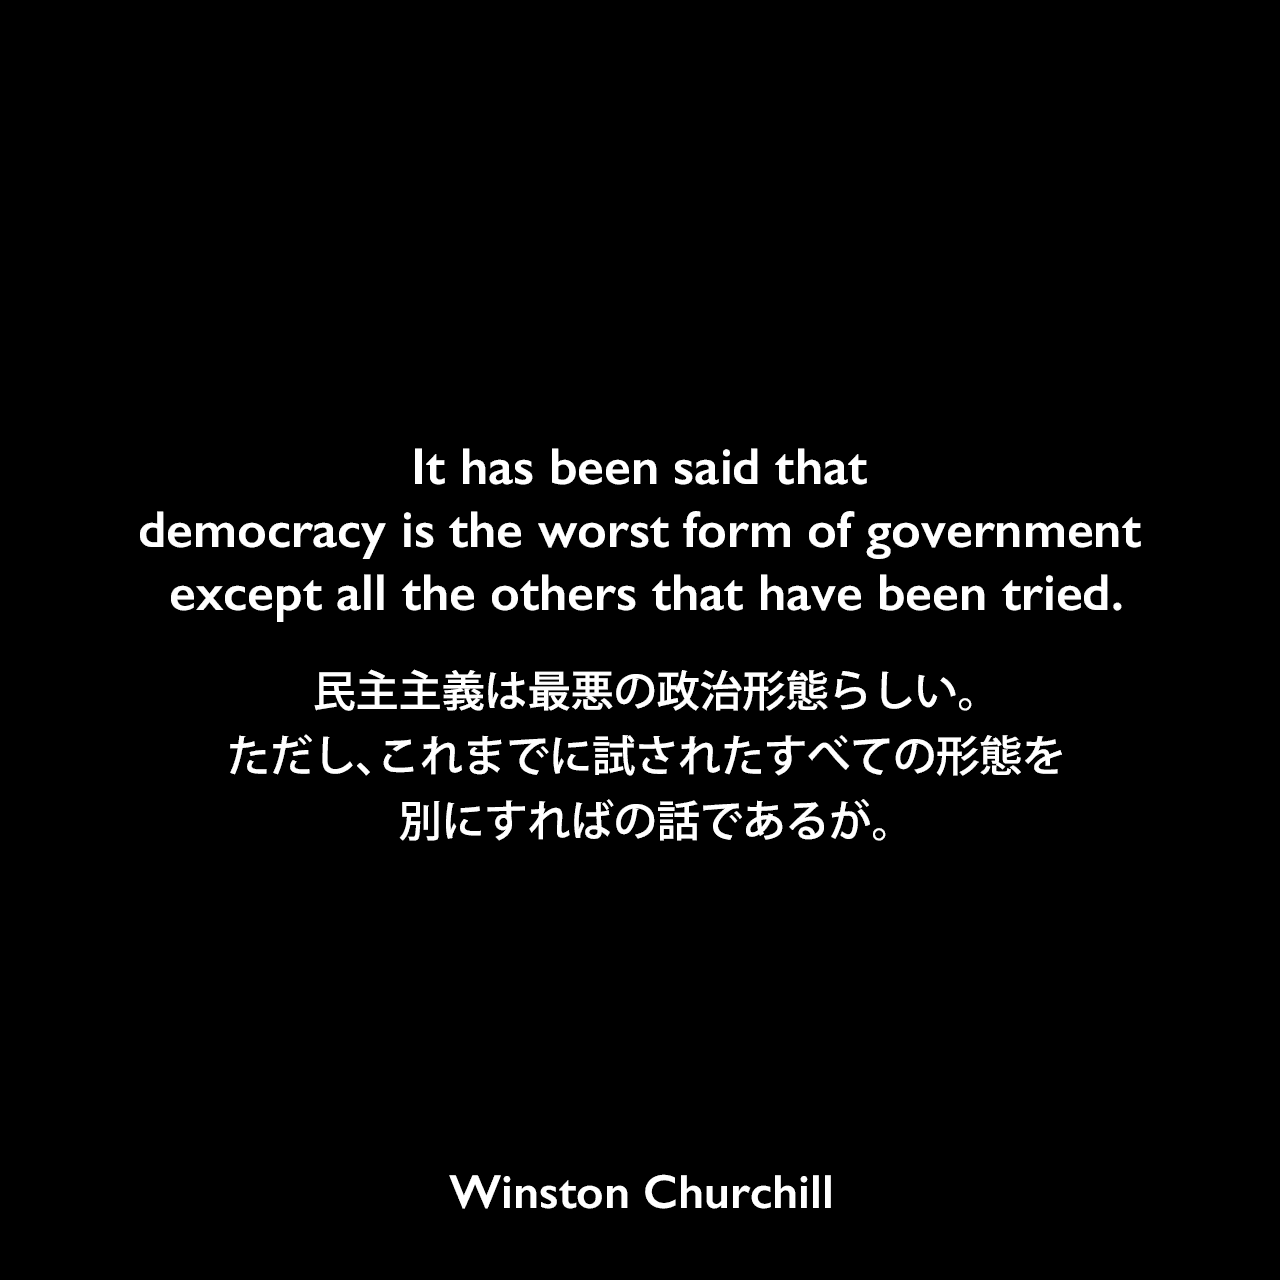 It has been said that democracy is the worst form of government except all the others that have been tried.民主主義は最悪の政治形態らしい。ただし、これまでに試されたすべての形態を別にすればの話であるが。- 1947年、イギリス庶民院でのスピーチよりWinston Churchill